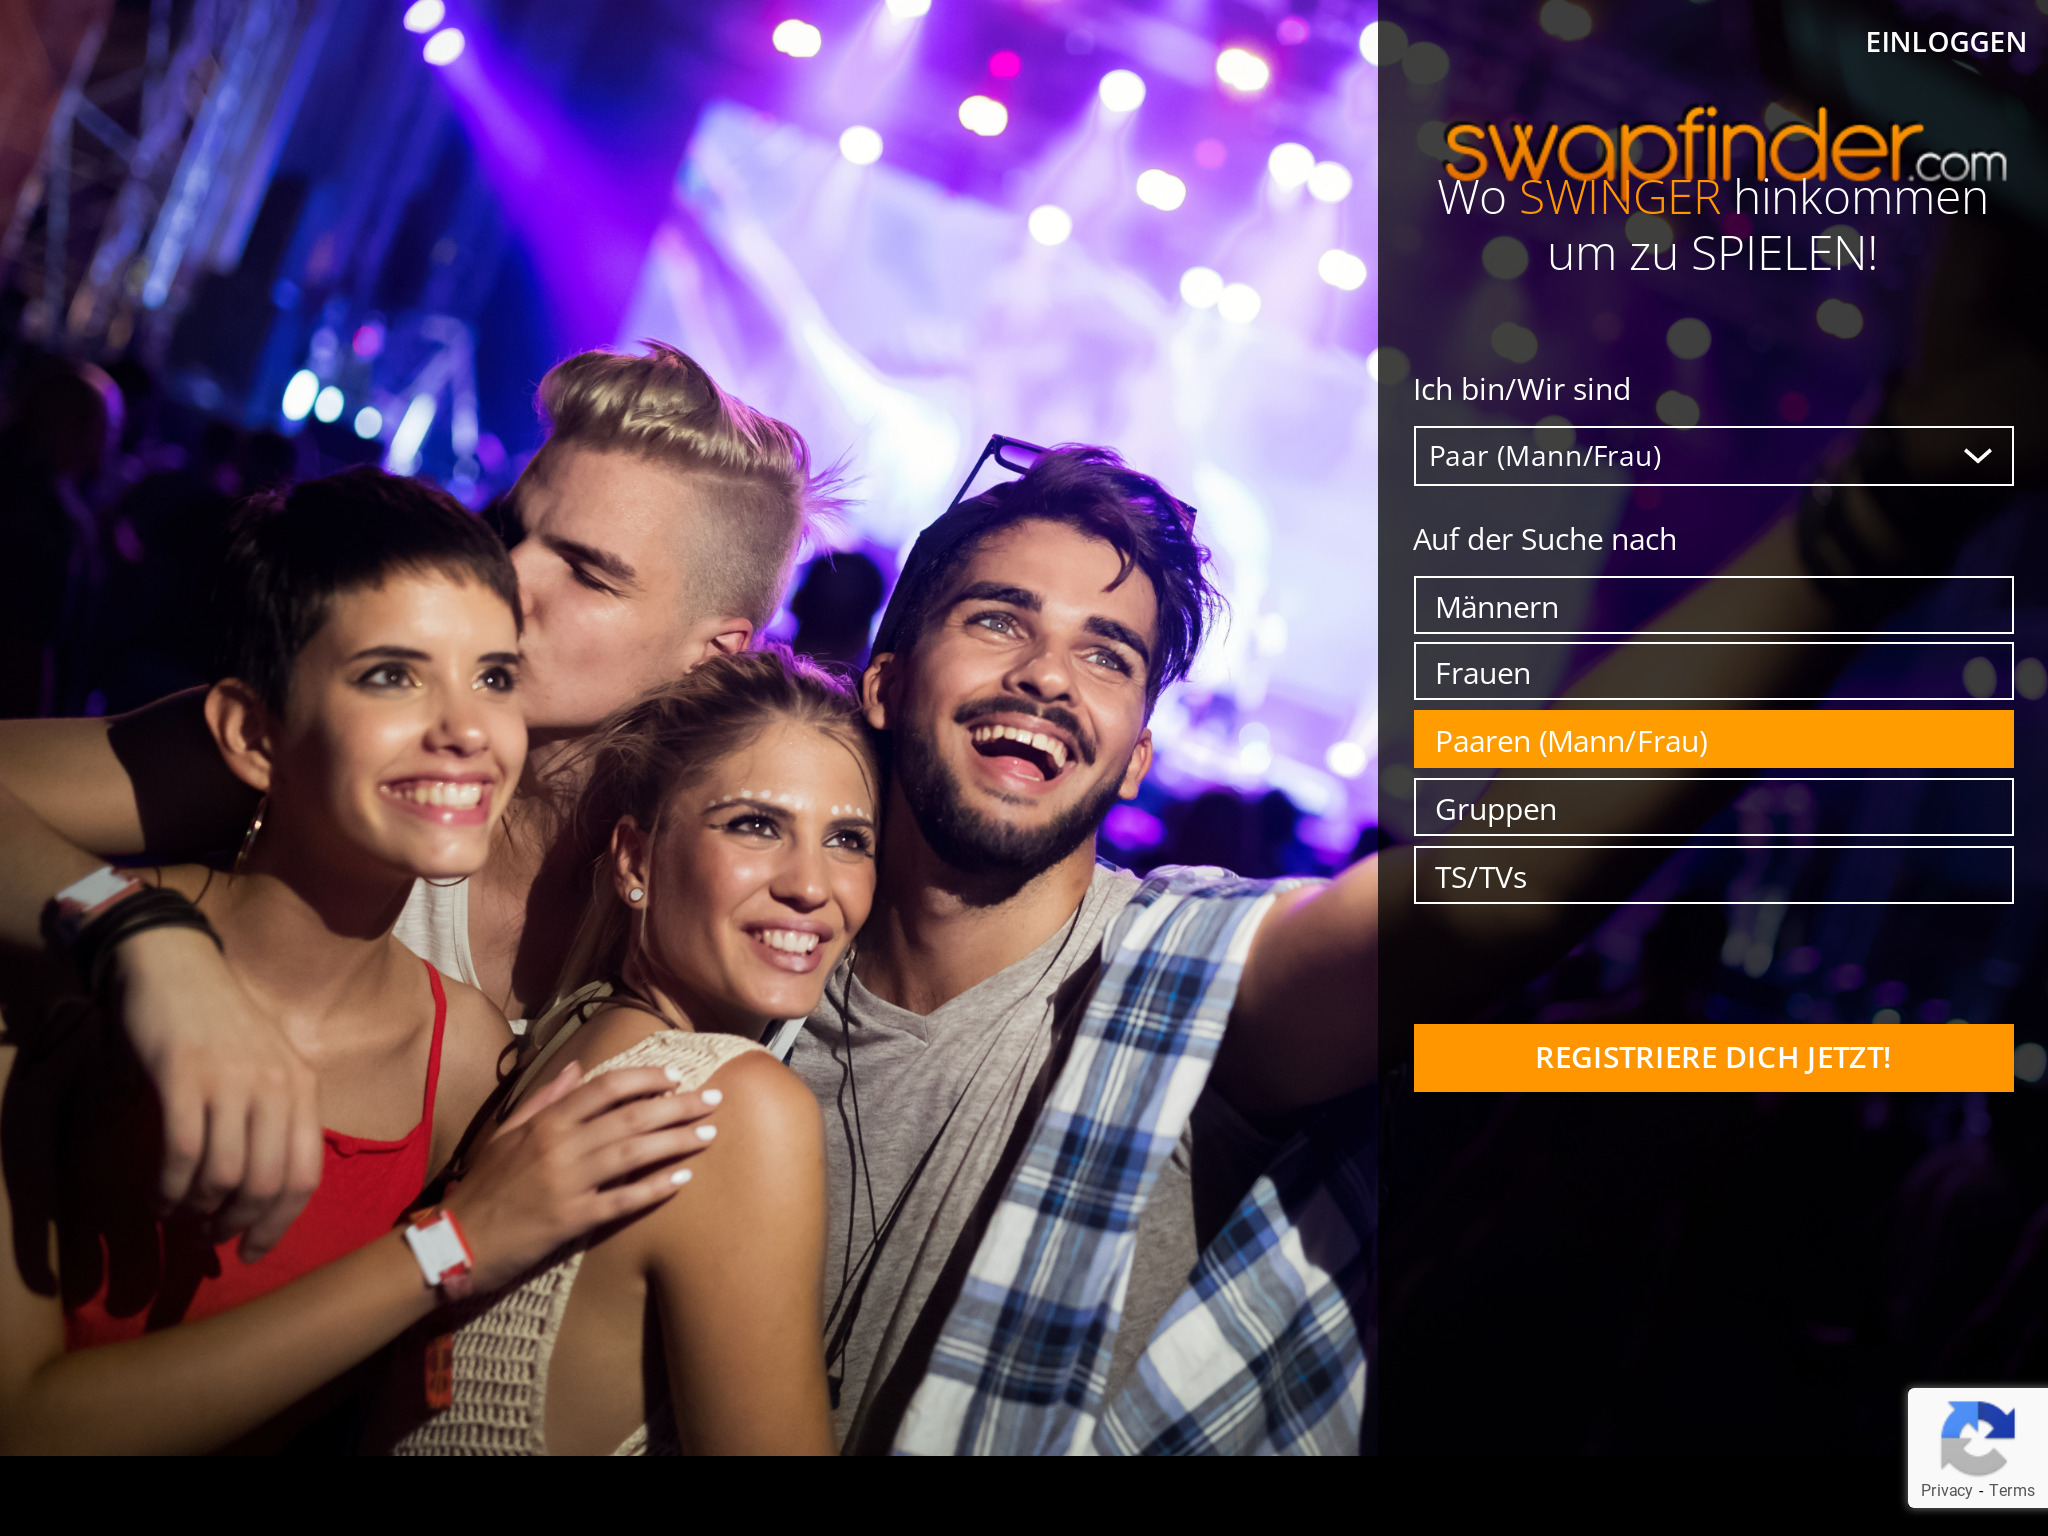 SwapFinder Review March Where Swingers Find Their Match! - DatingScout